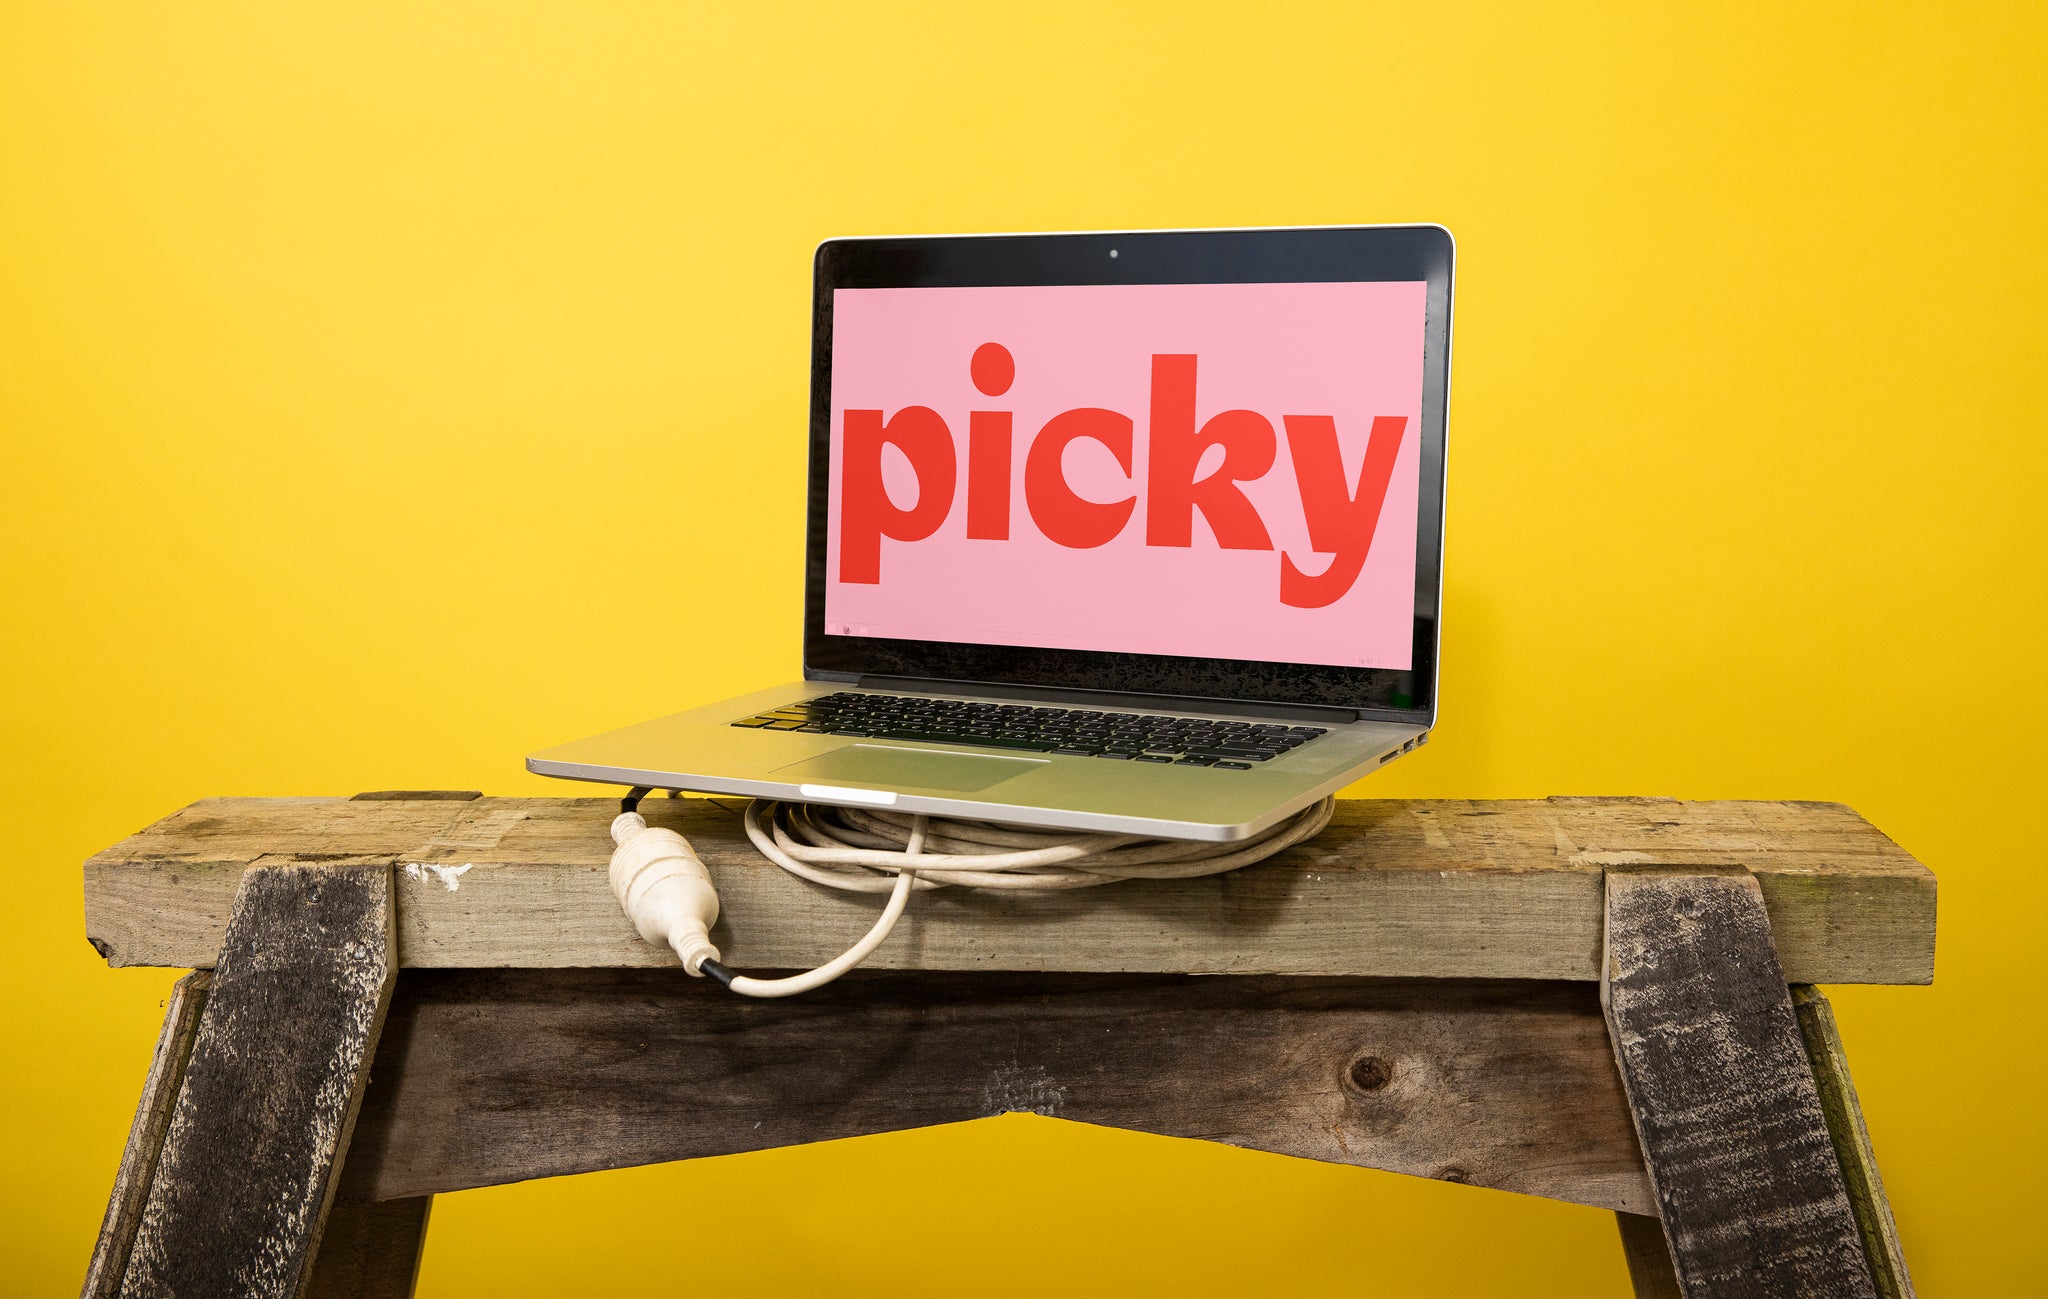 Landscape close-up of a MacBook computer atop a white power cable and wooden saw horse in front of a yellow backdrop. The screen is pink with large red picky logo text.